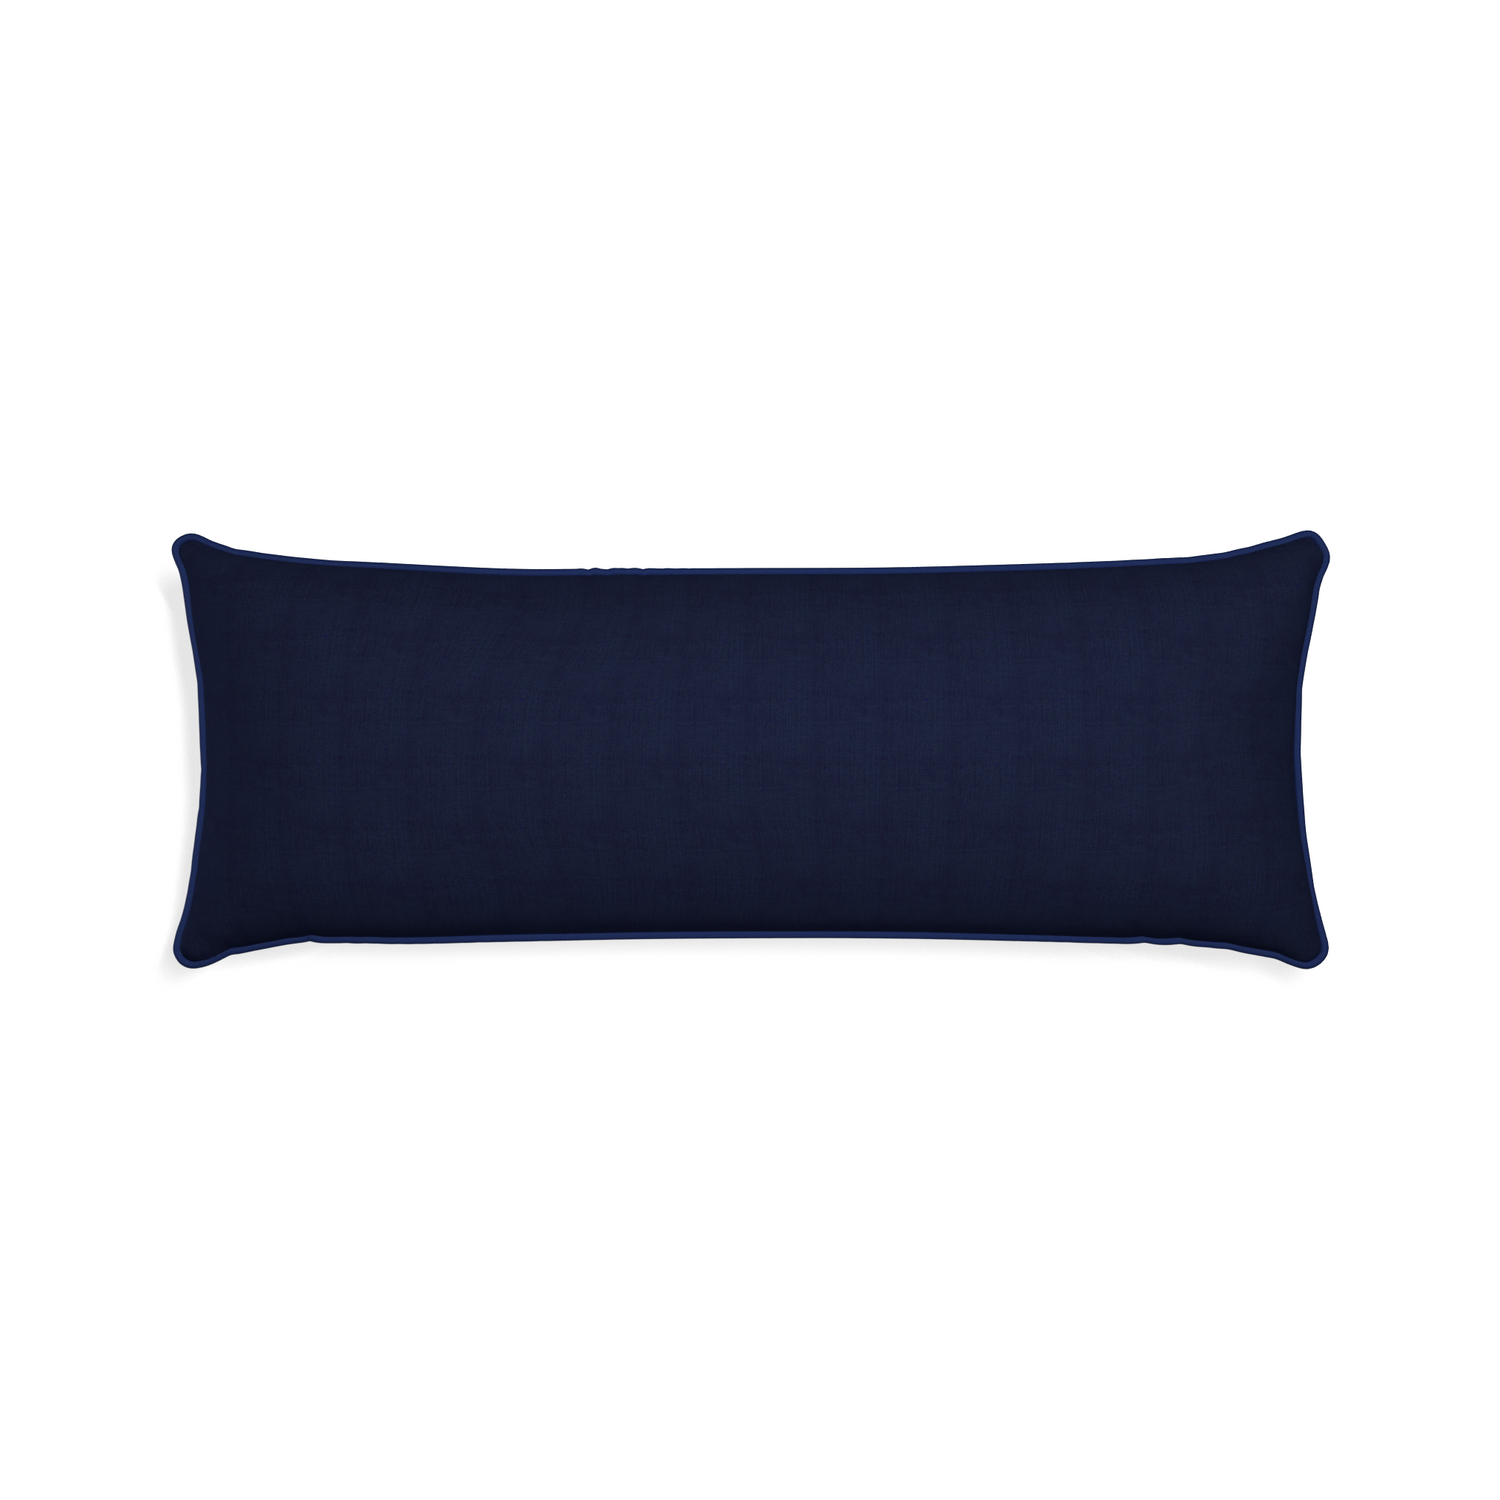 Xl-lumbar midnight custom navy bluepillow with midnight piping on white background